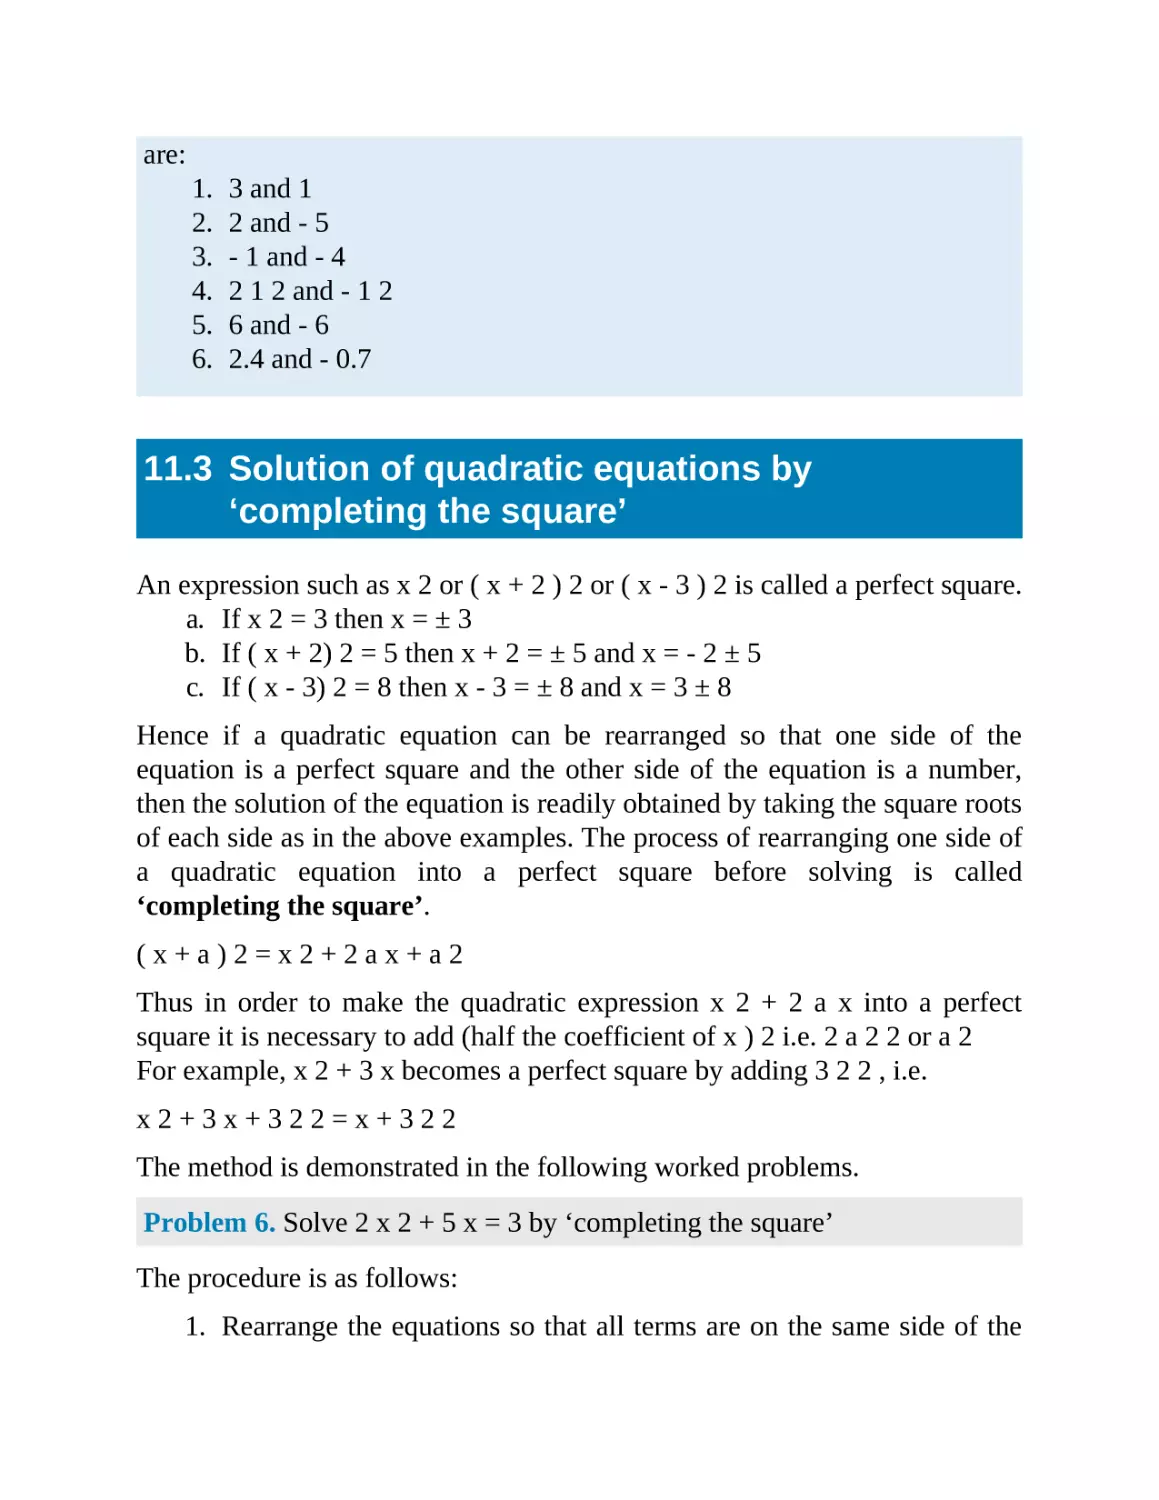 11.3 Solution of quadratic equations by ‘completing the square’